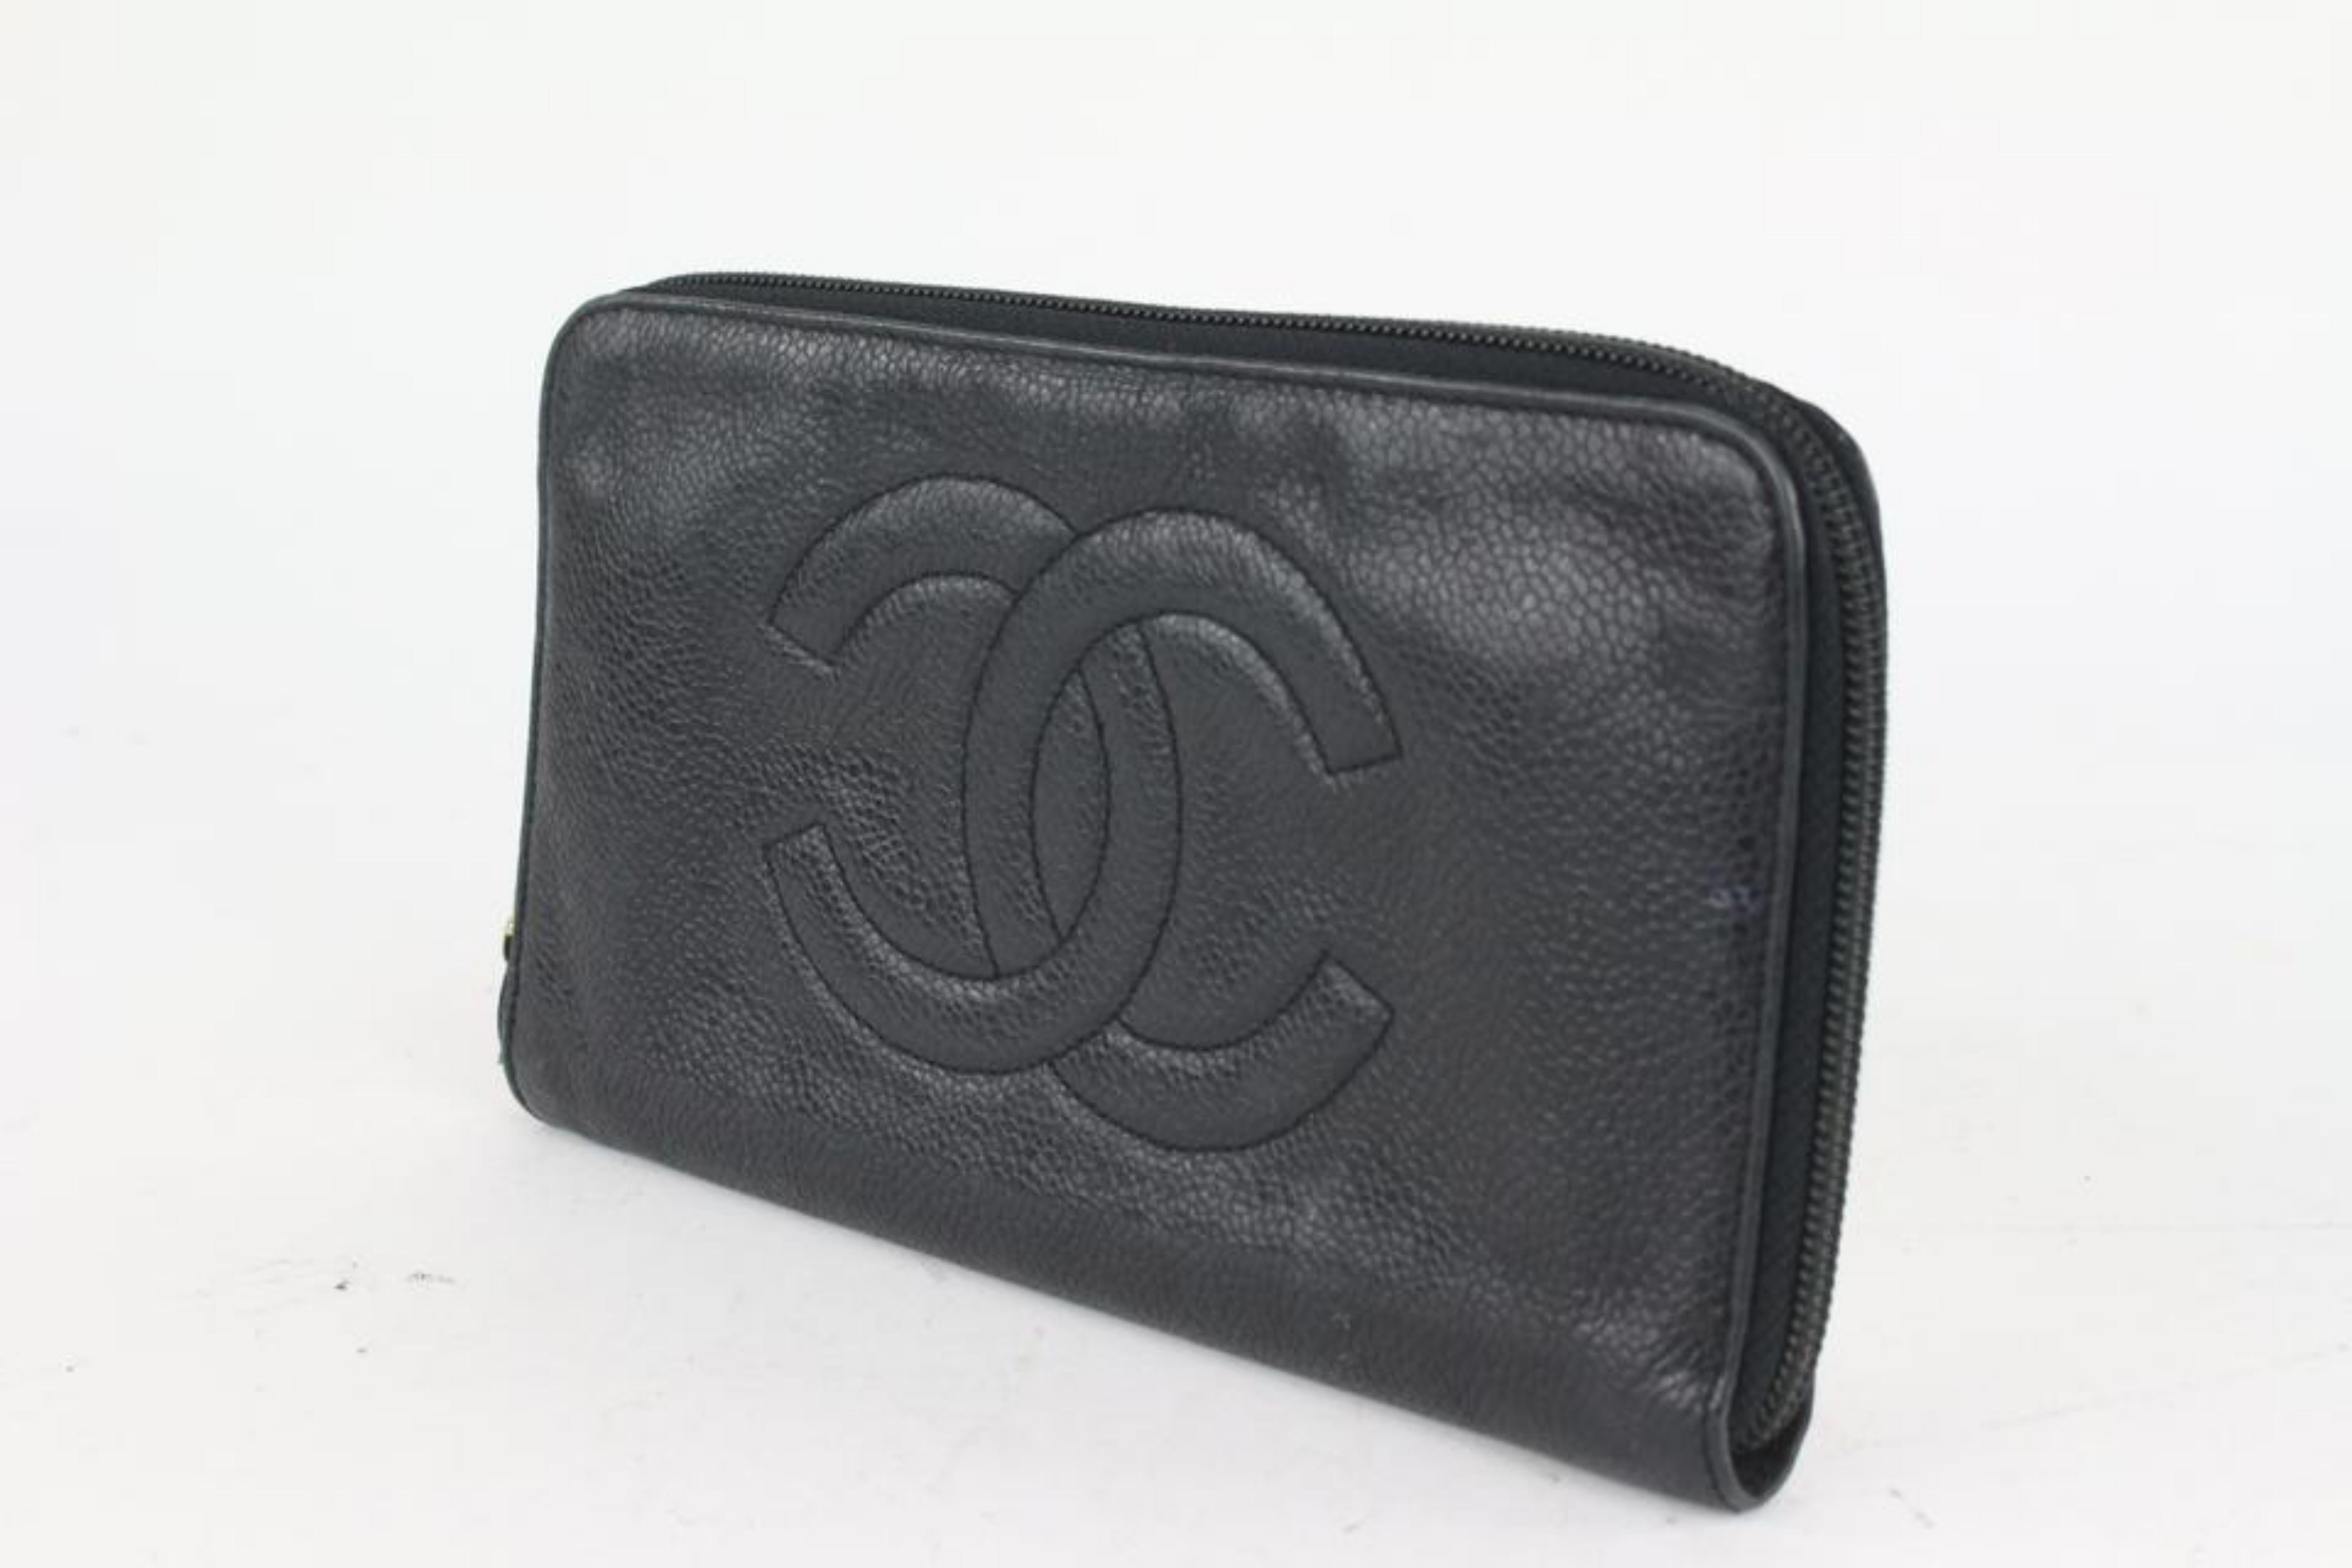 Black lCaviar CC Logo L-Gusset Zip Around Wallet Long Zippy 2CK1024a
Date Code/Serial Number: 3889291
Made In: Italy
Measurements: Length:  7.75